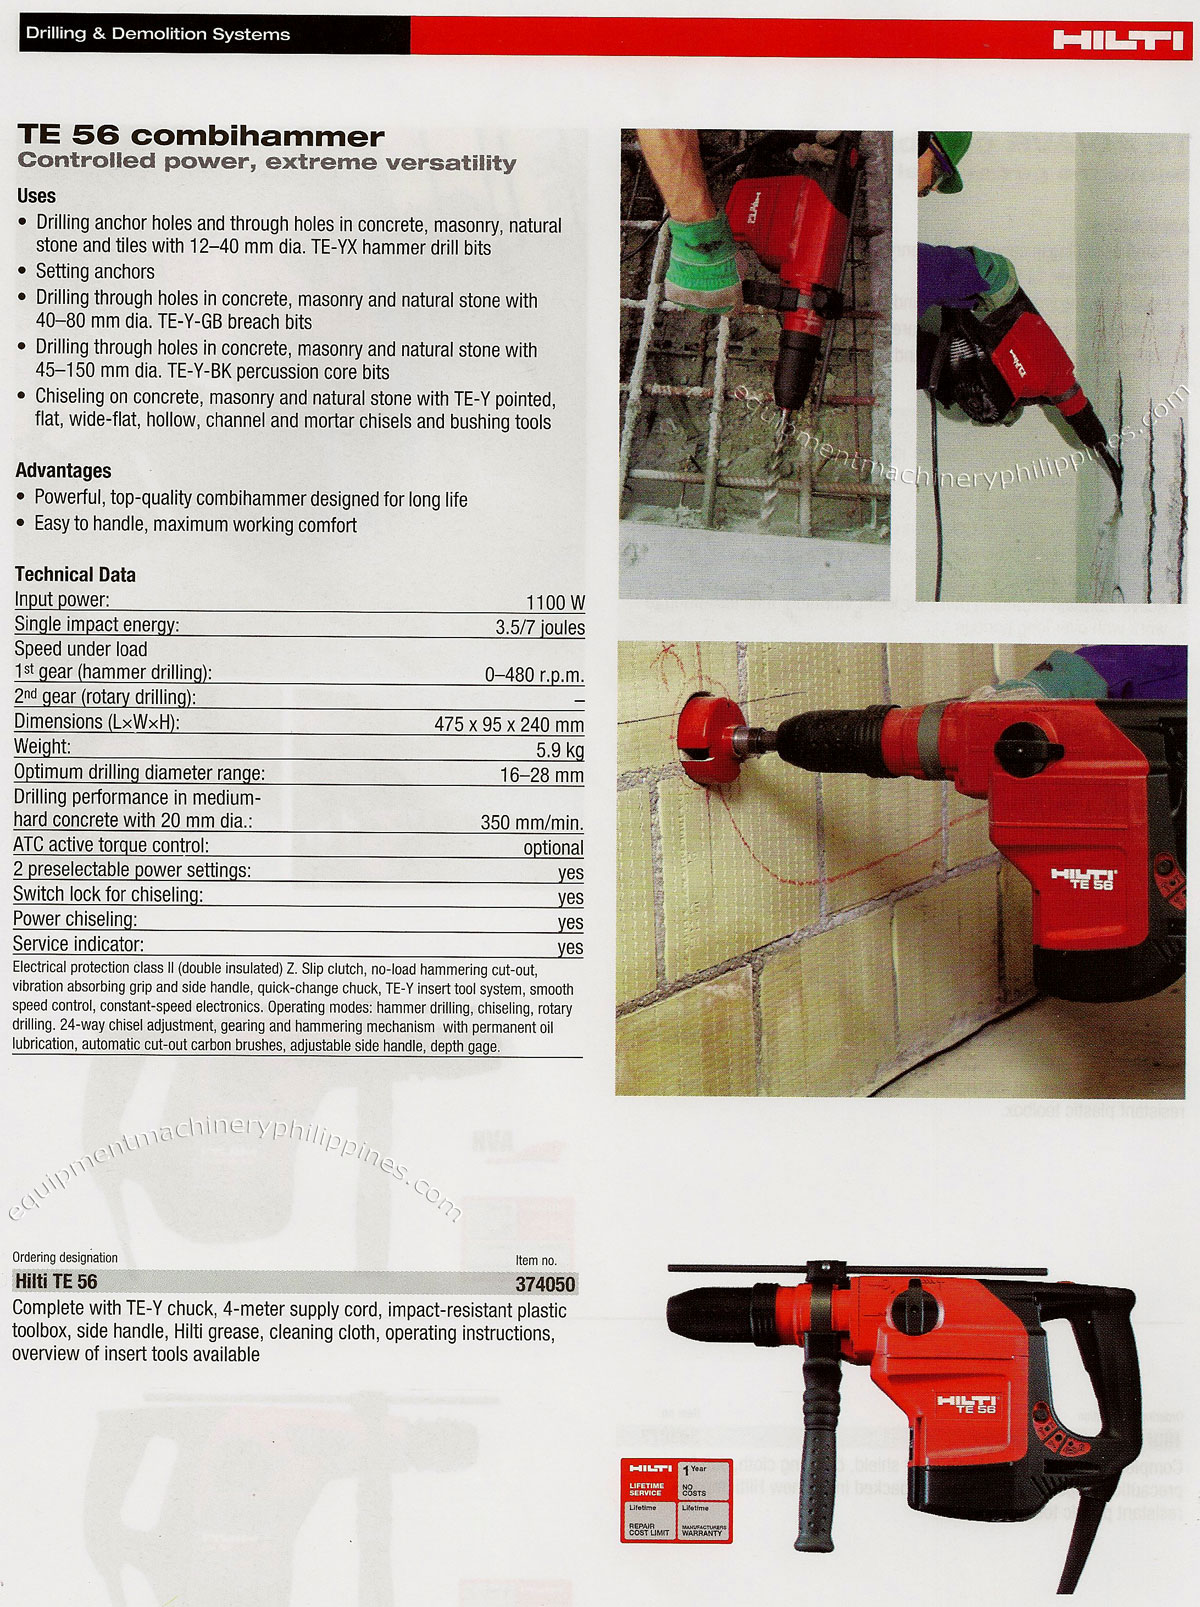 TE 56 Combihammer Power Tool for Drilling and Demolition Jobs